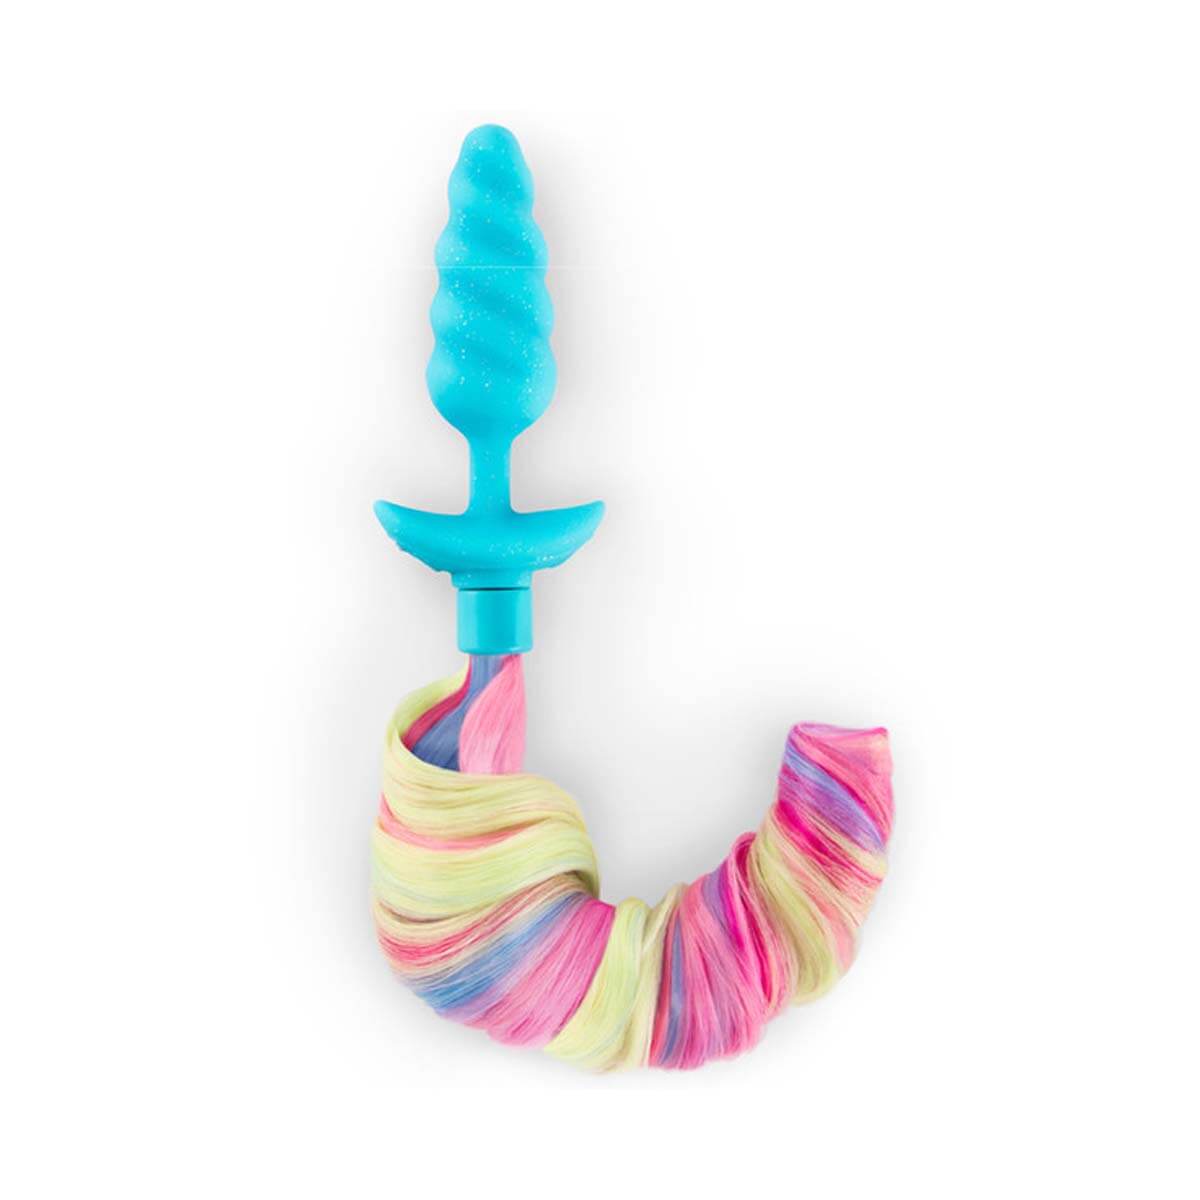 Blue textured silicone butt plug with multicoloured curly tail Nudie Co